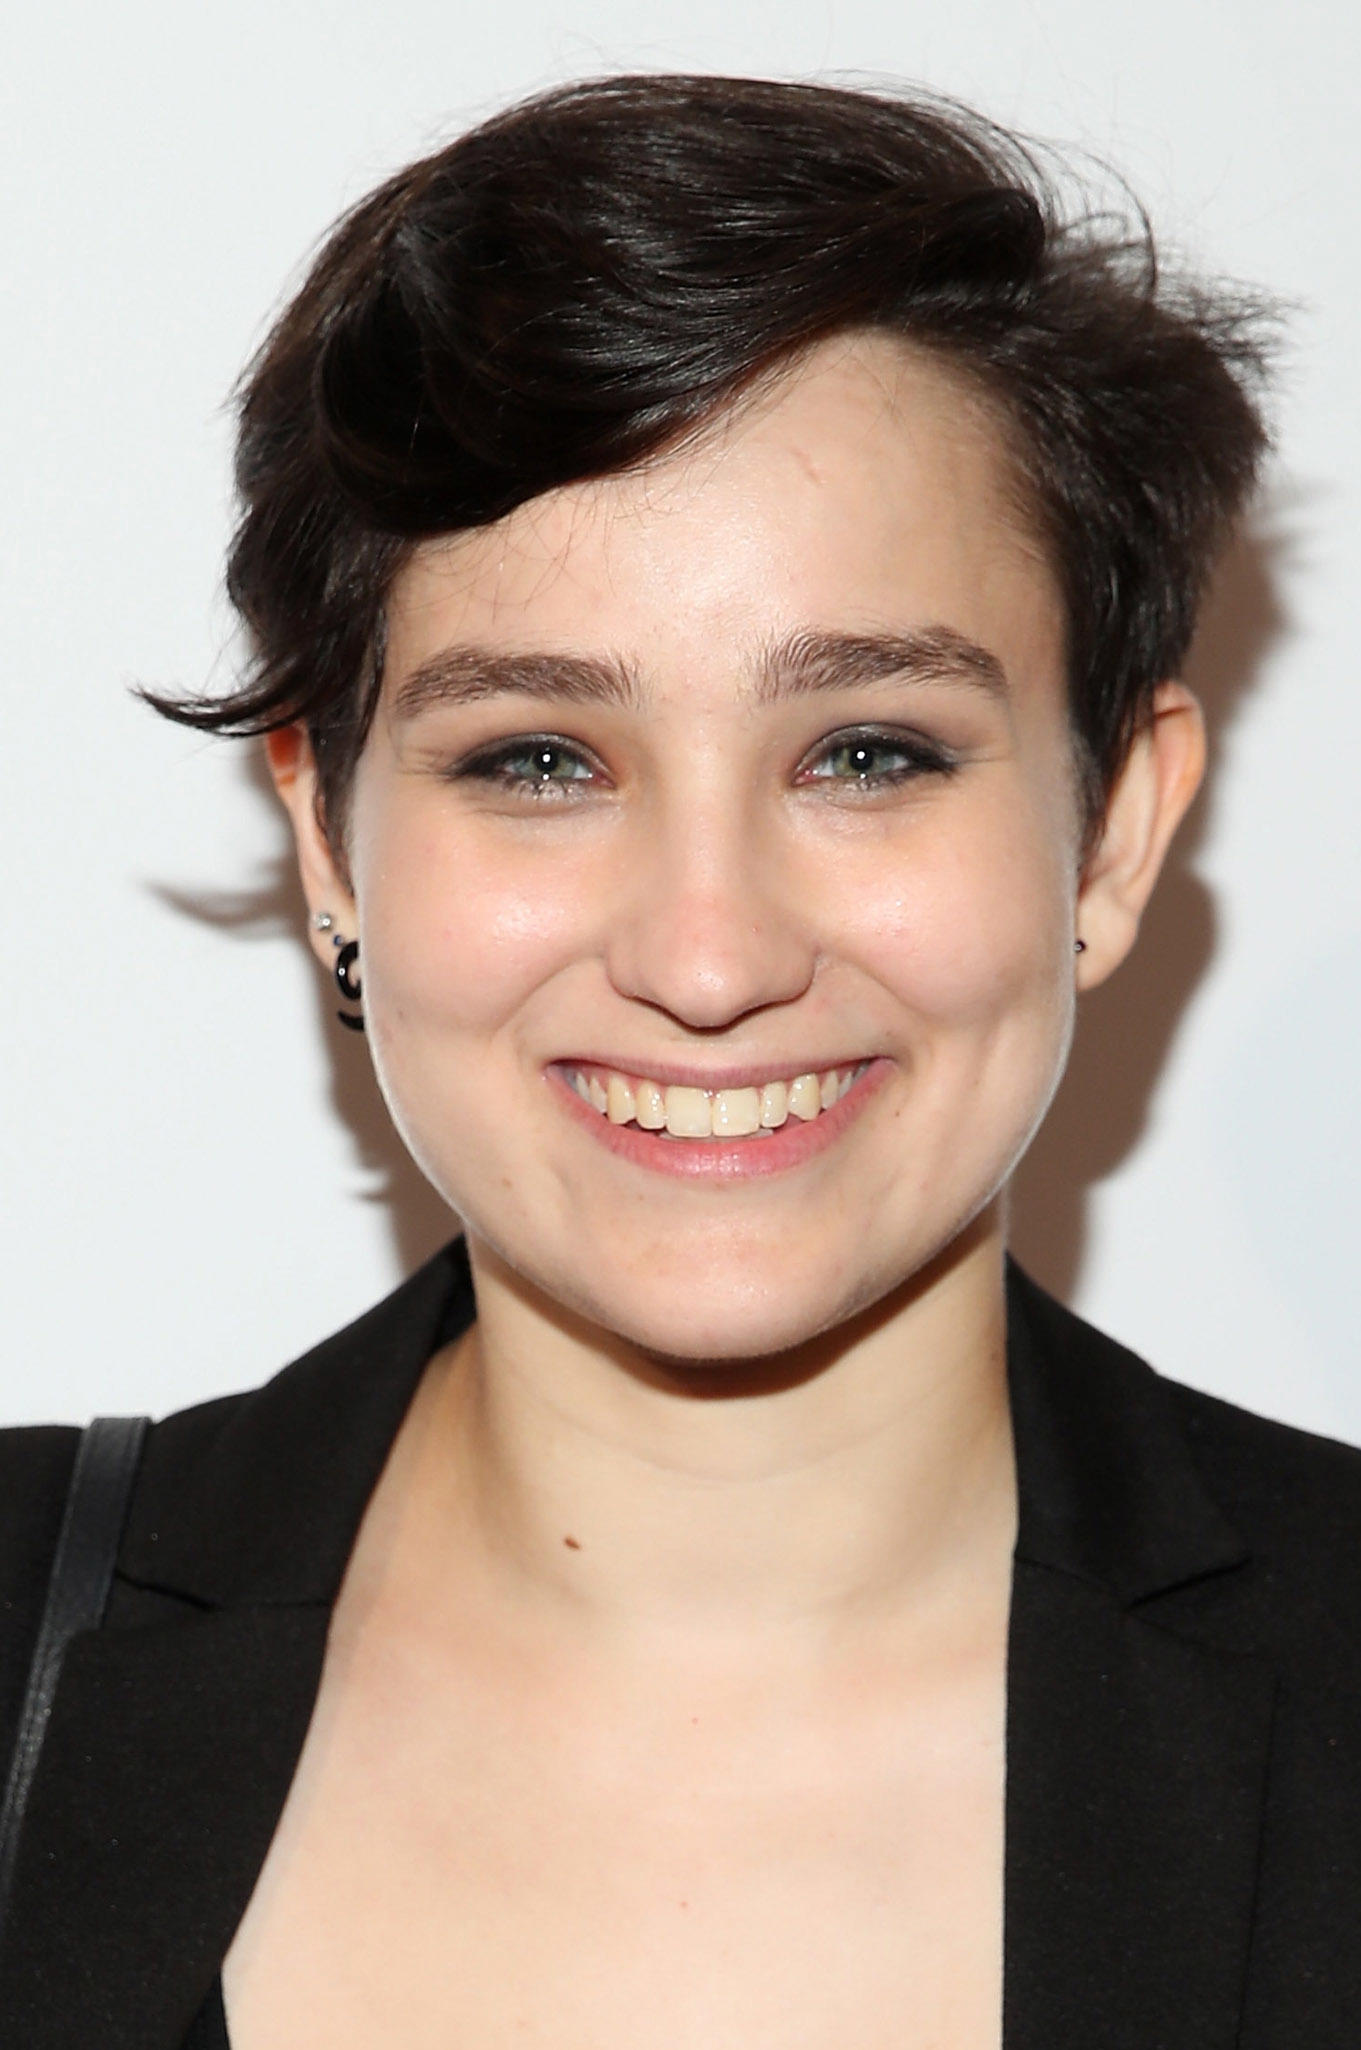 How tall is Bex Taylor Klaus?